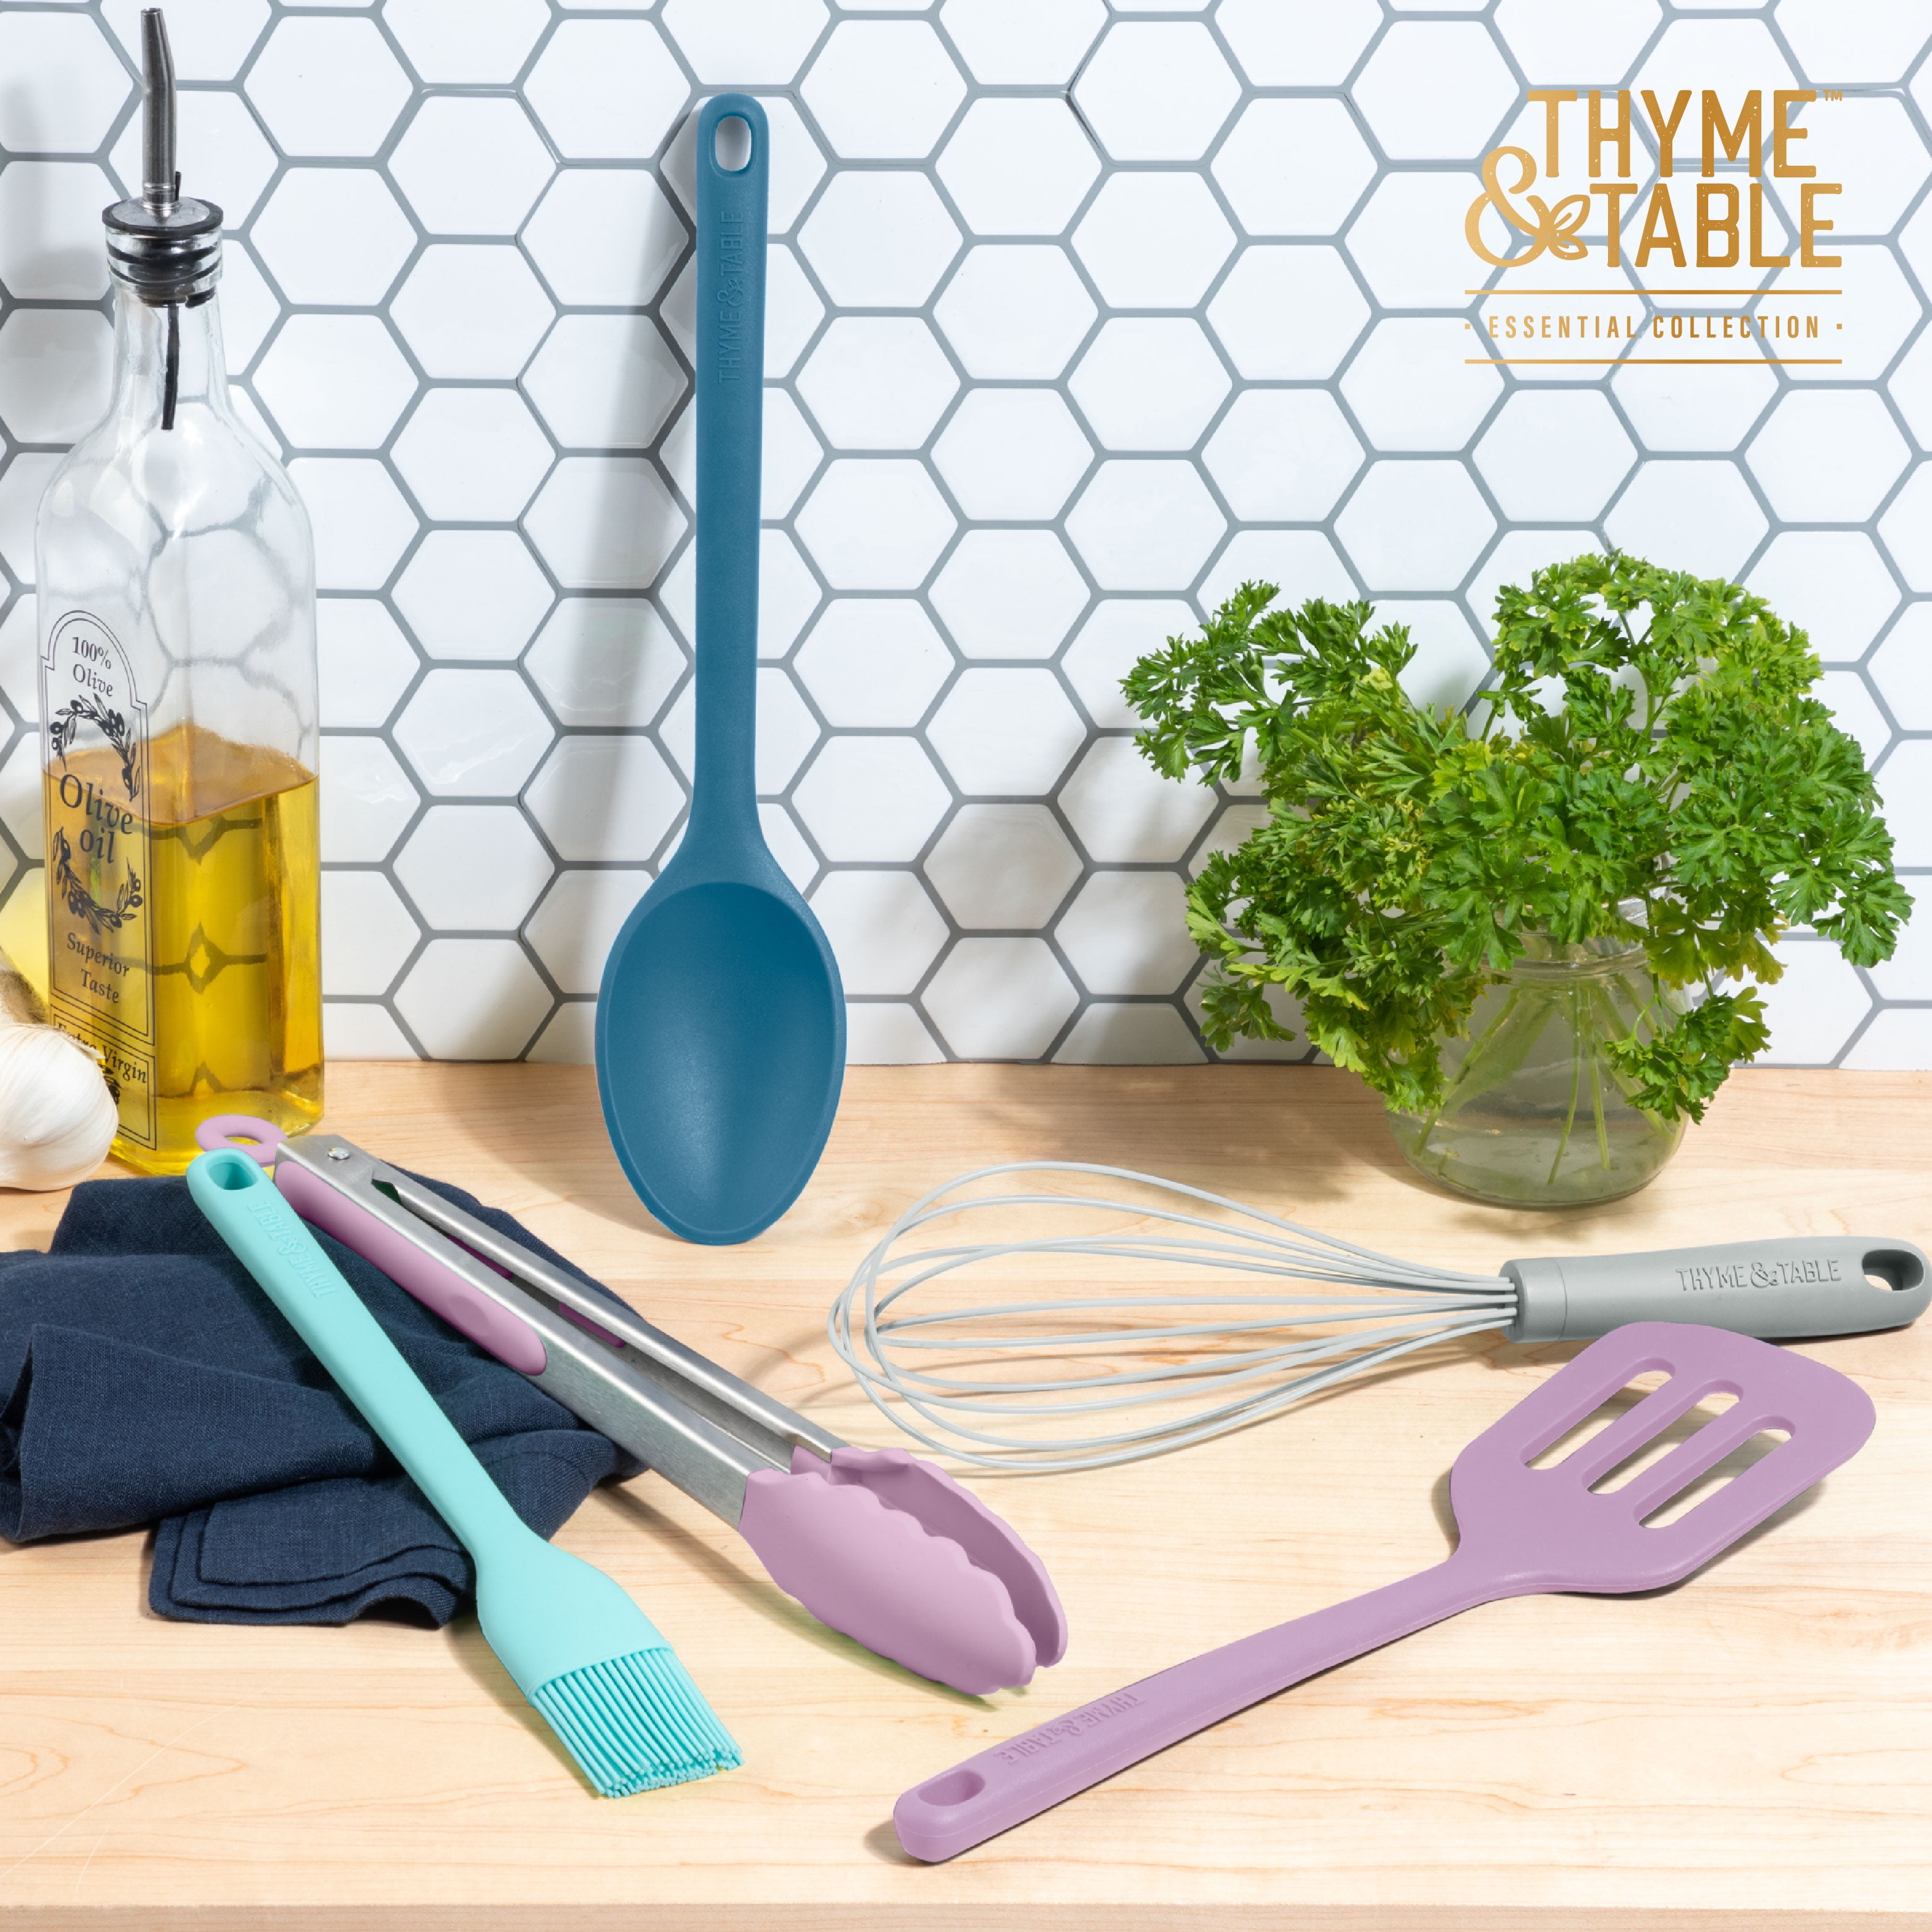 Thyme & Table Food Safe Heat Resistant Silicone Whisk, Blue 